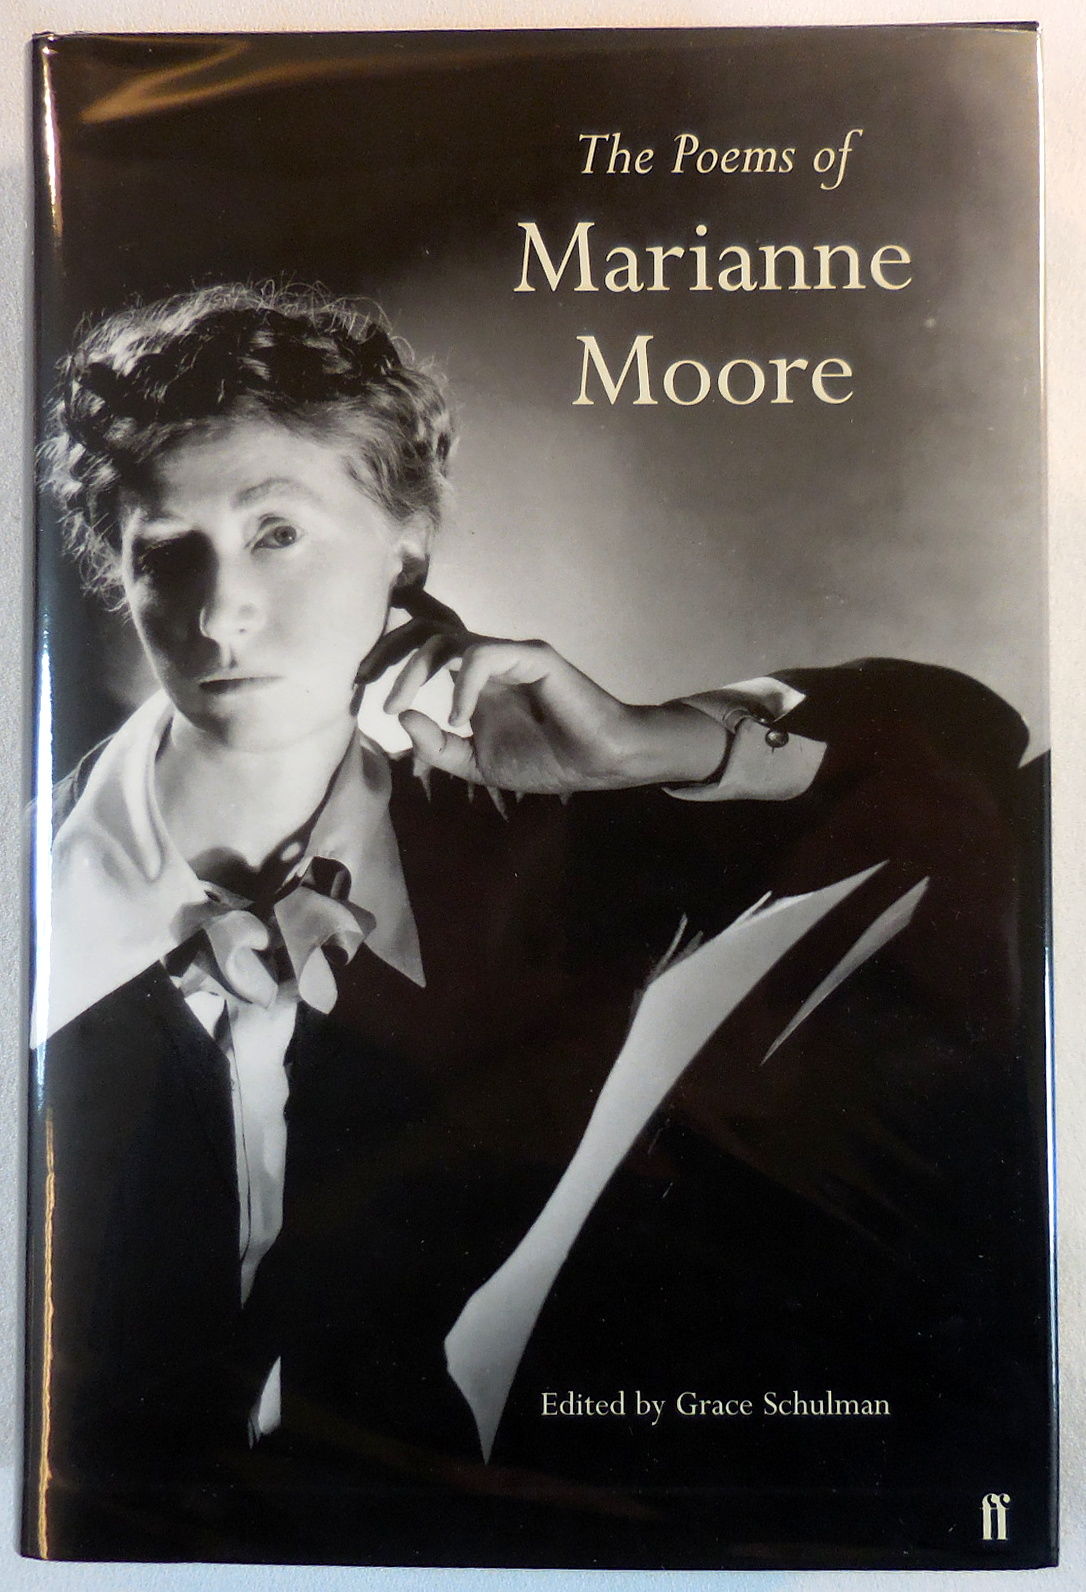 The Poems of Marianne Moore - Marianne Moore